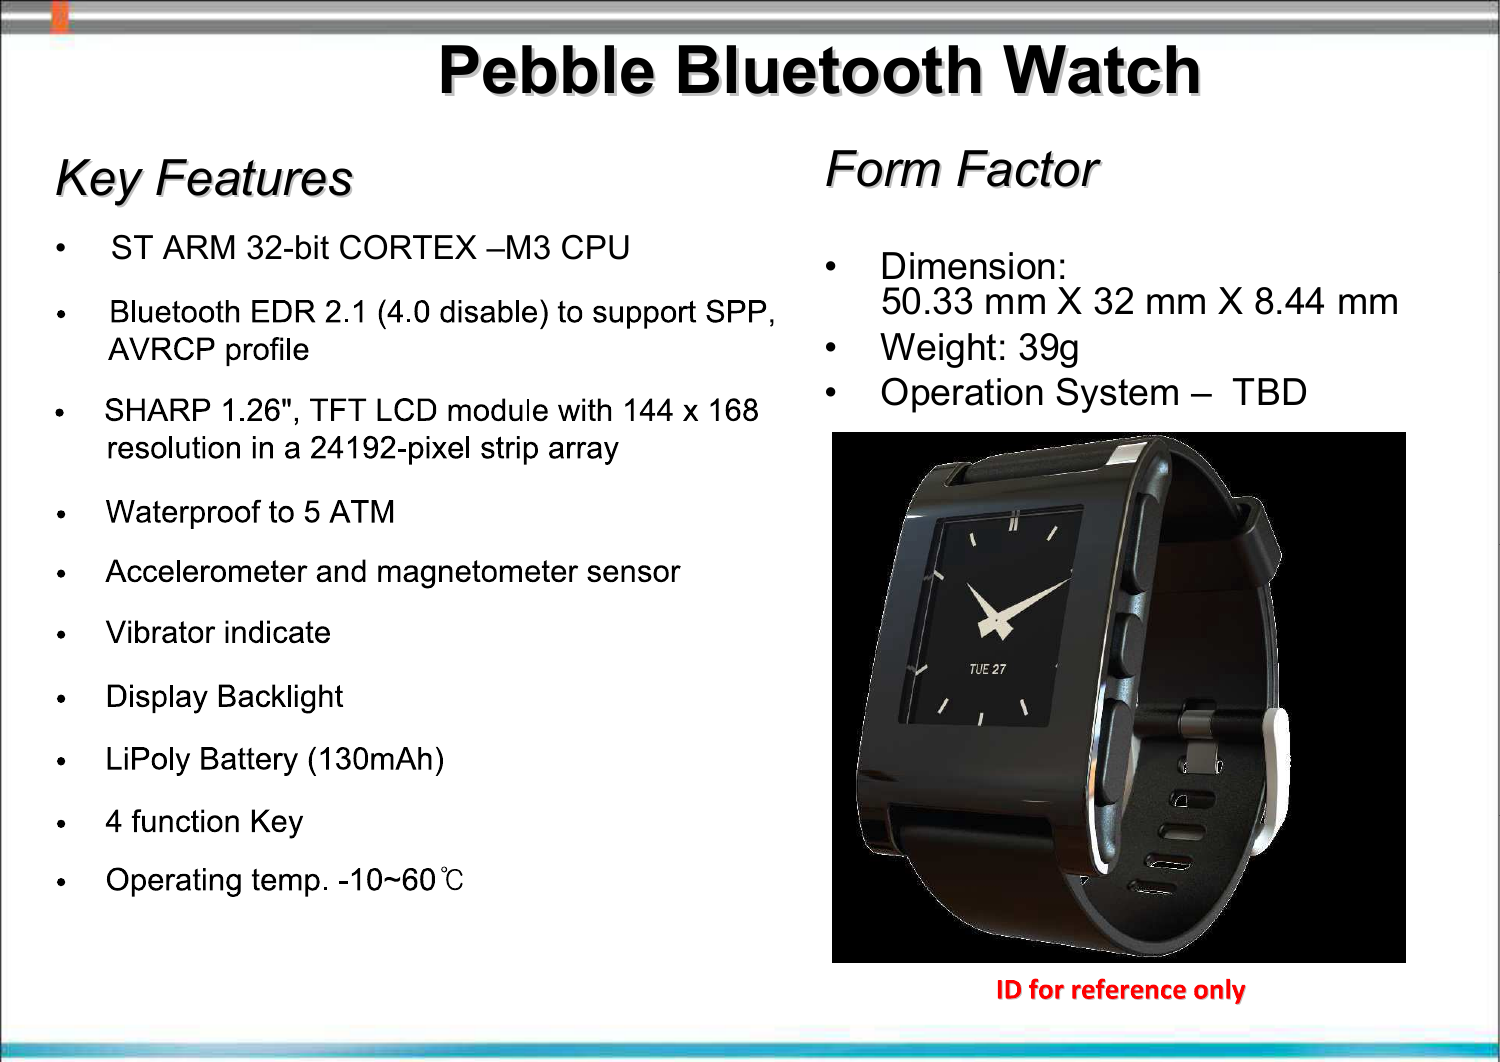 Pebble Bluetooth WatchPebble Bluetooth WatchKey FeaturesKey Features• ST ARM 32-bit CORTEX –M3 CPU• Panasonic PAN1316 Bluetooth EDR 2.1 (4.0 disable) module support SPP, AVRCP profile; The maximum power consumption is less than 15 mA and the average powerconsumption is about 1 uA• SHARP 1.26’,TFT LCD module with 144 168 resolution in a 24192-pixel stripe array• Waterproof to 5 ATM• Accelerometer and magnetometer sensor• Vibrator indicate• Display Backlight • LiPoly Battery (120mAh)• 4 function Key Form FactorForm Factor• Dimension: 50.33 mm X 32 mm X 8.44 mm• Weight: 39g• Operation System – TBD